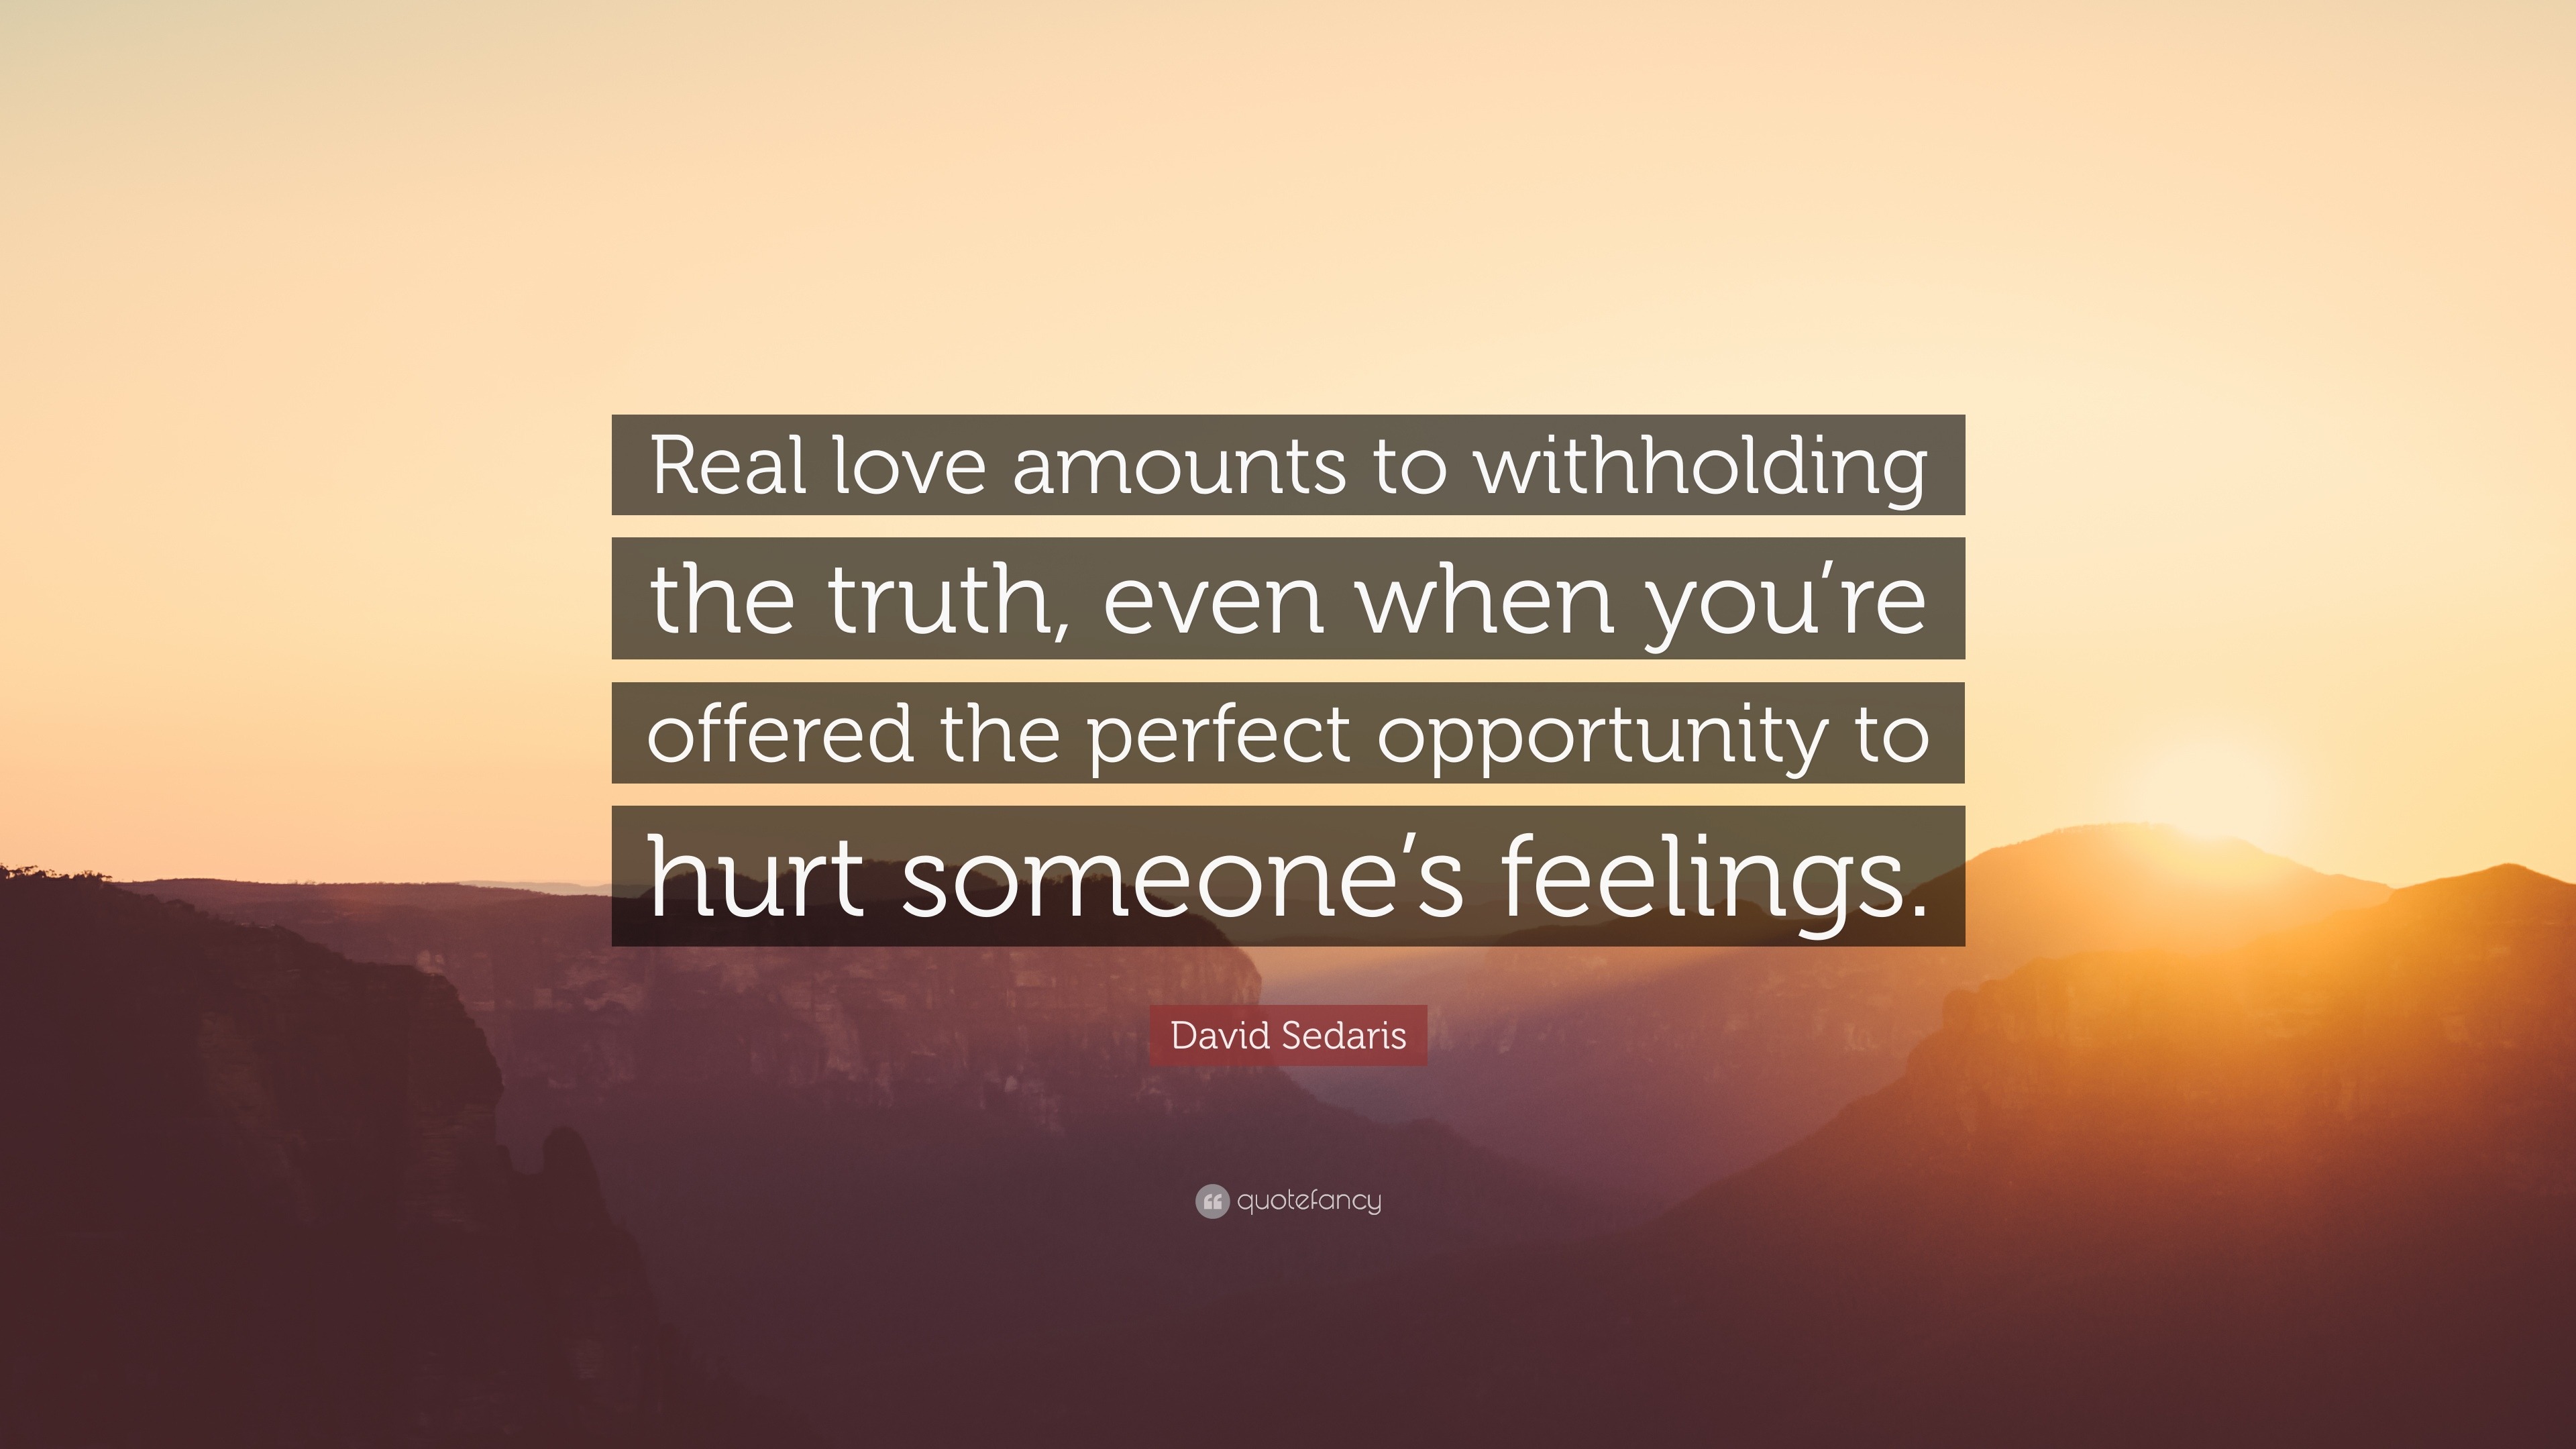 David Sedaris Quote “Real love amounts to withholding the truth even when you